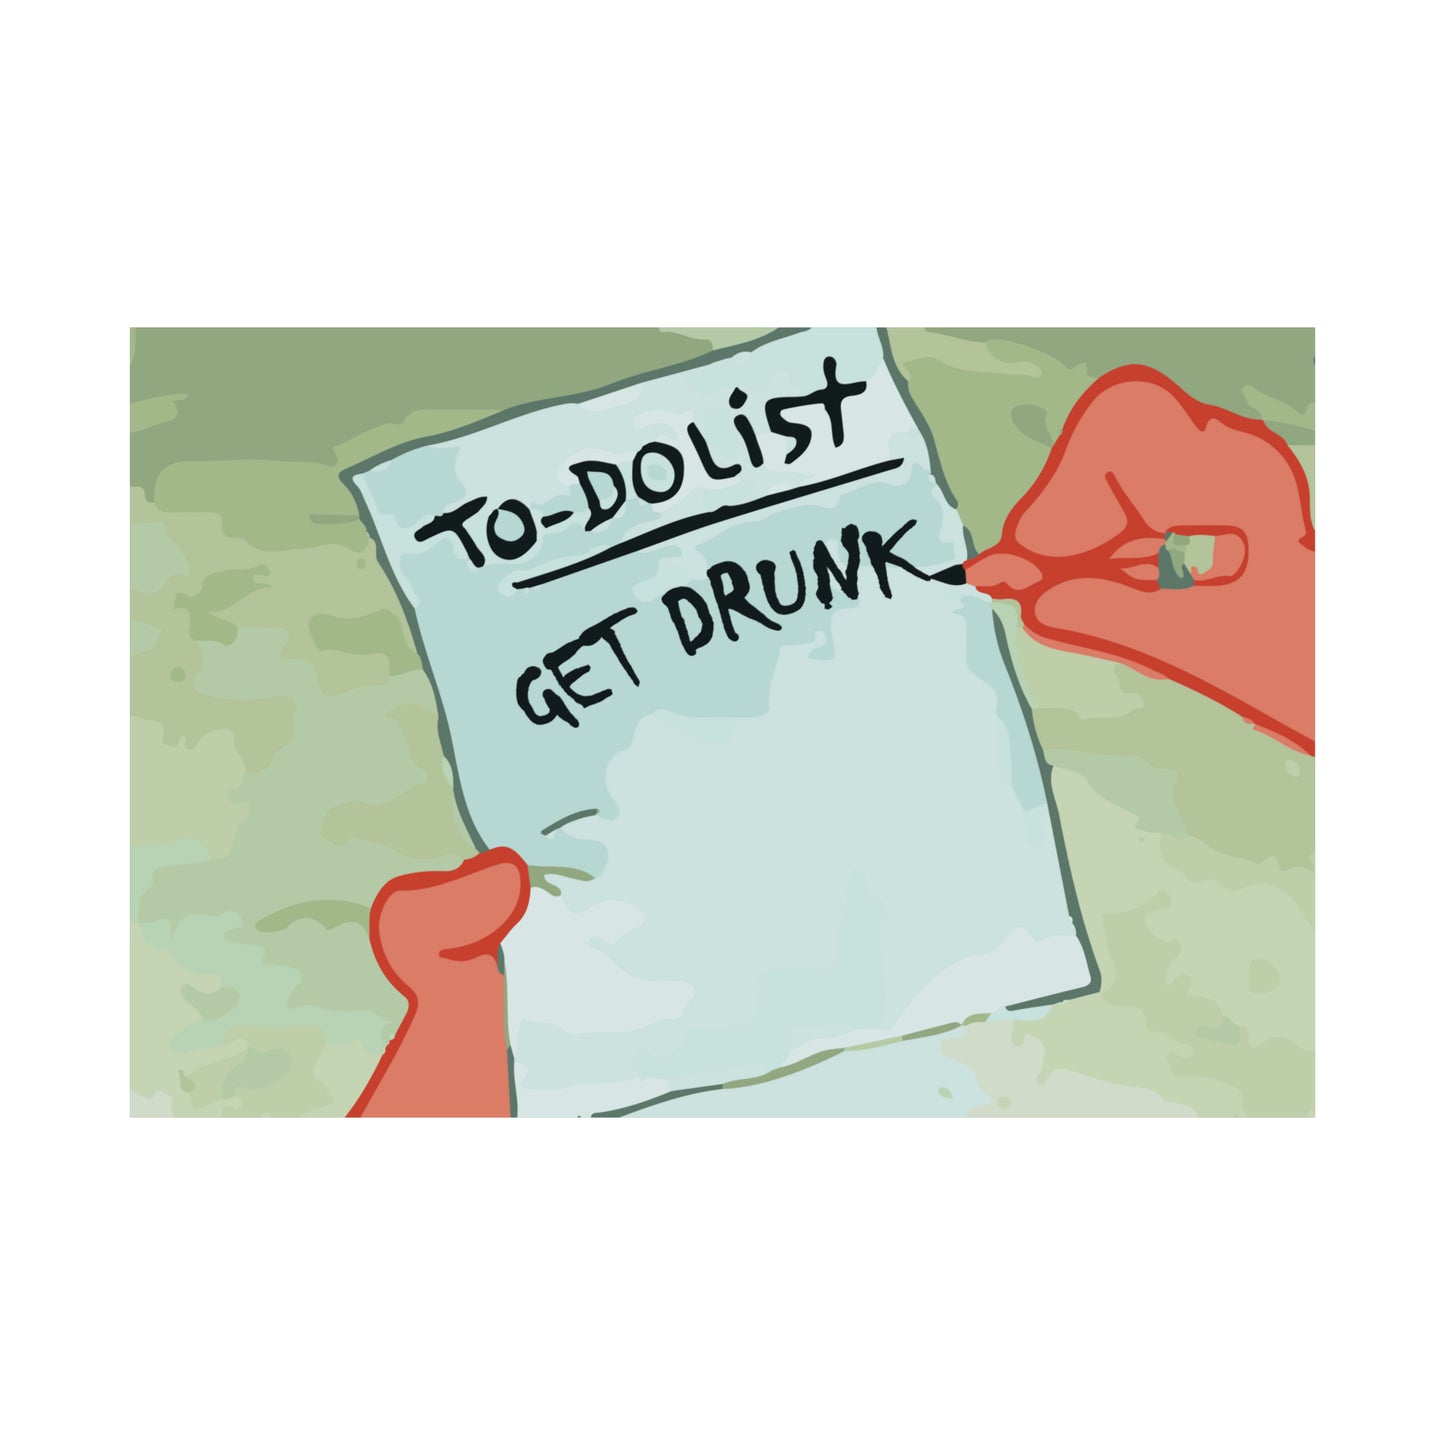 To-Do List: Get Drunk, College Poster